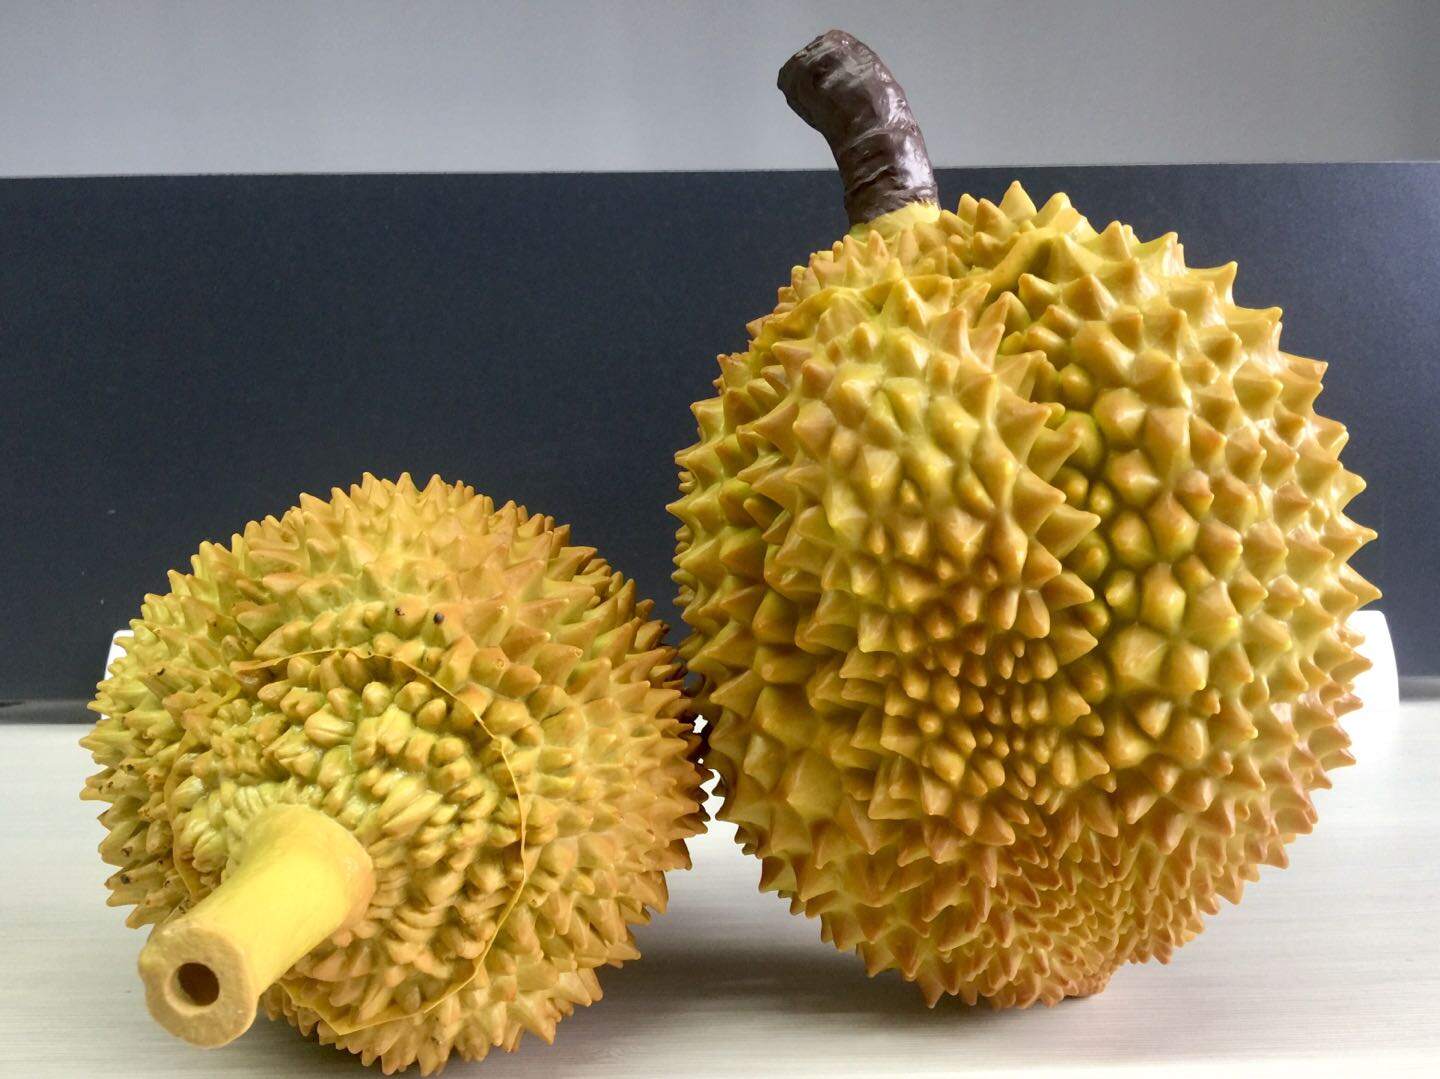 Details about   Artificial Fake Fruits Durian Hotel Restaurant Sample Kids Pretend Play Toy 